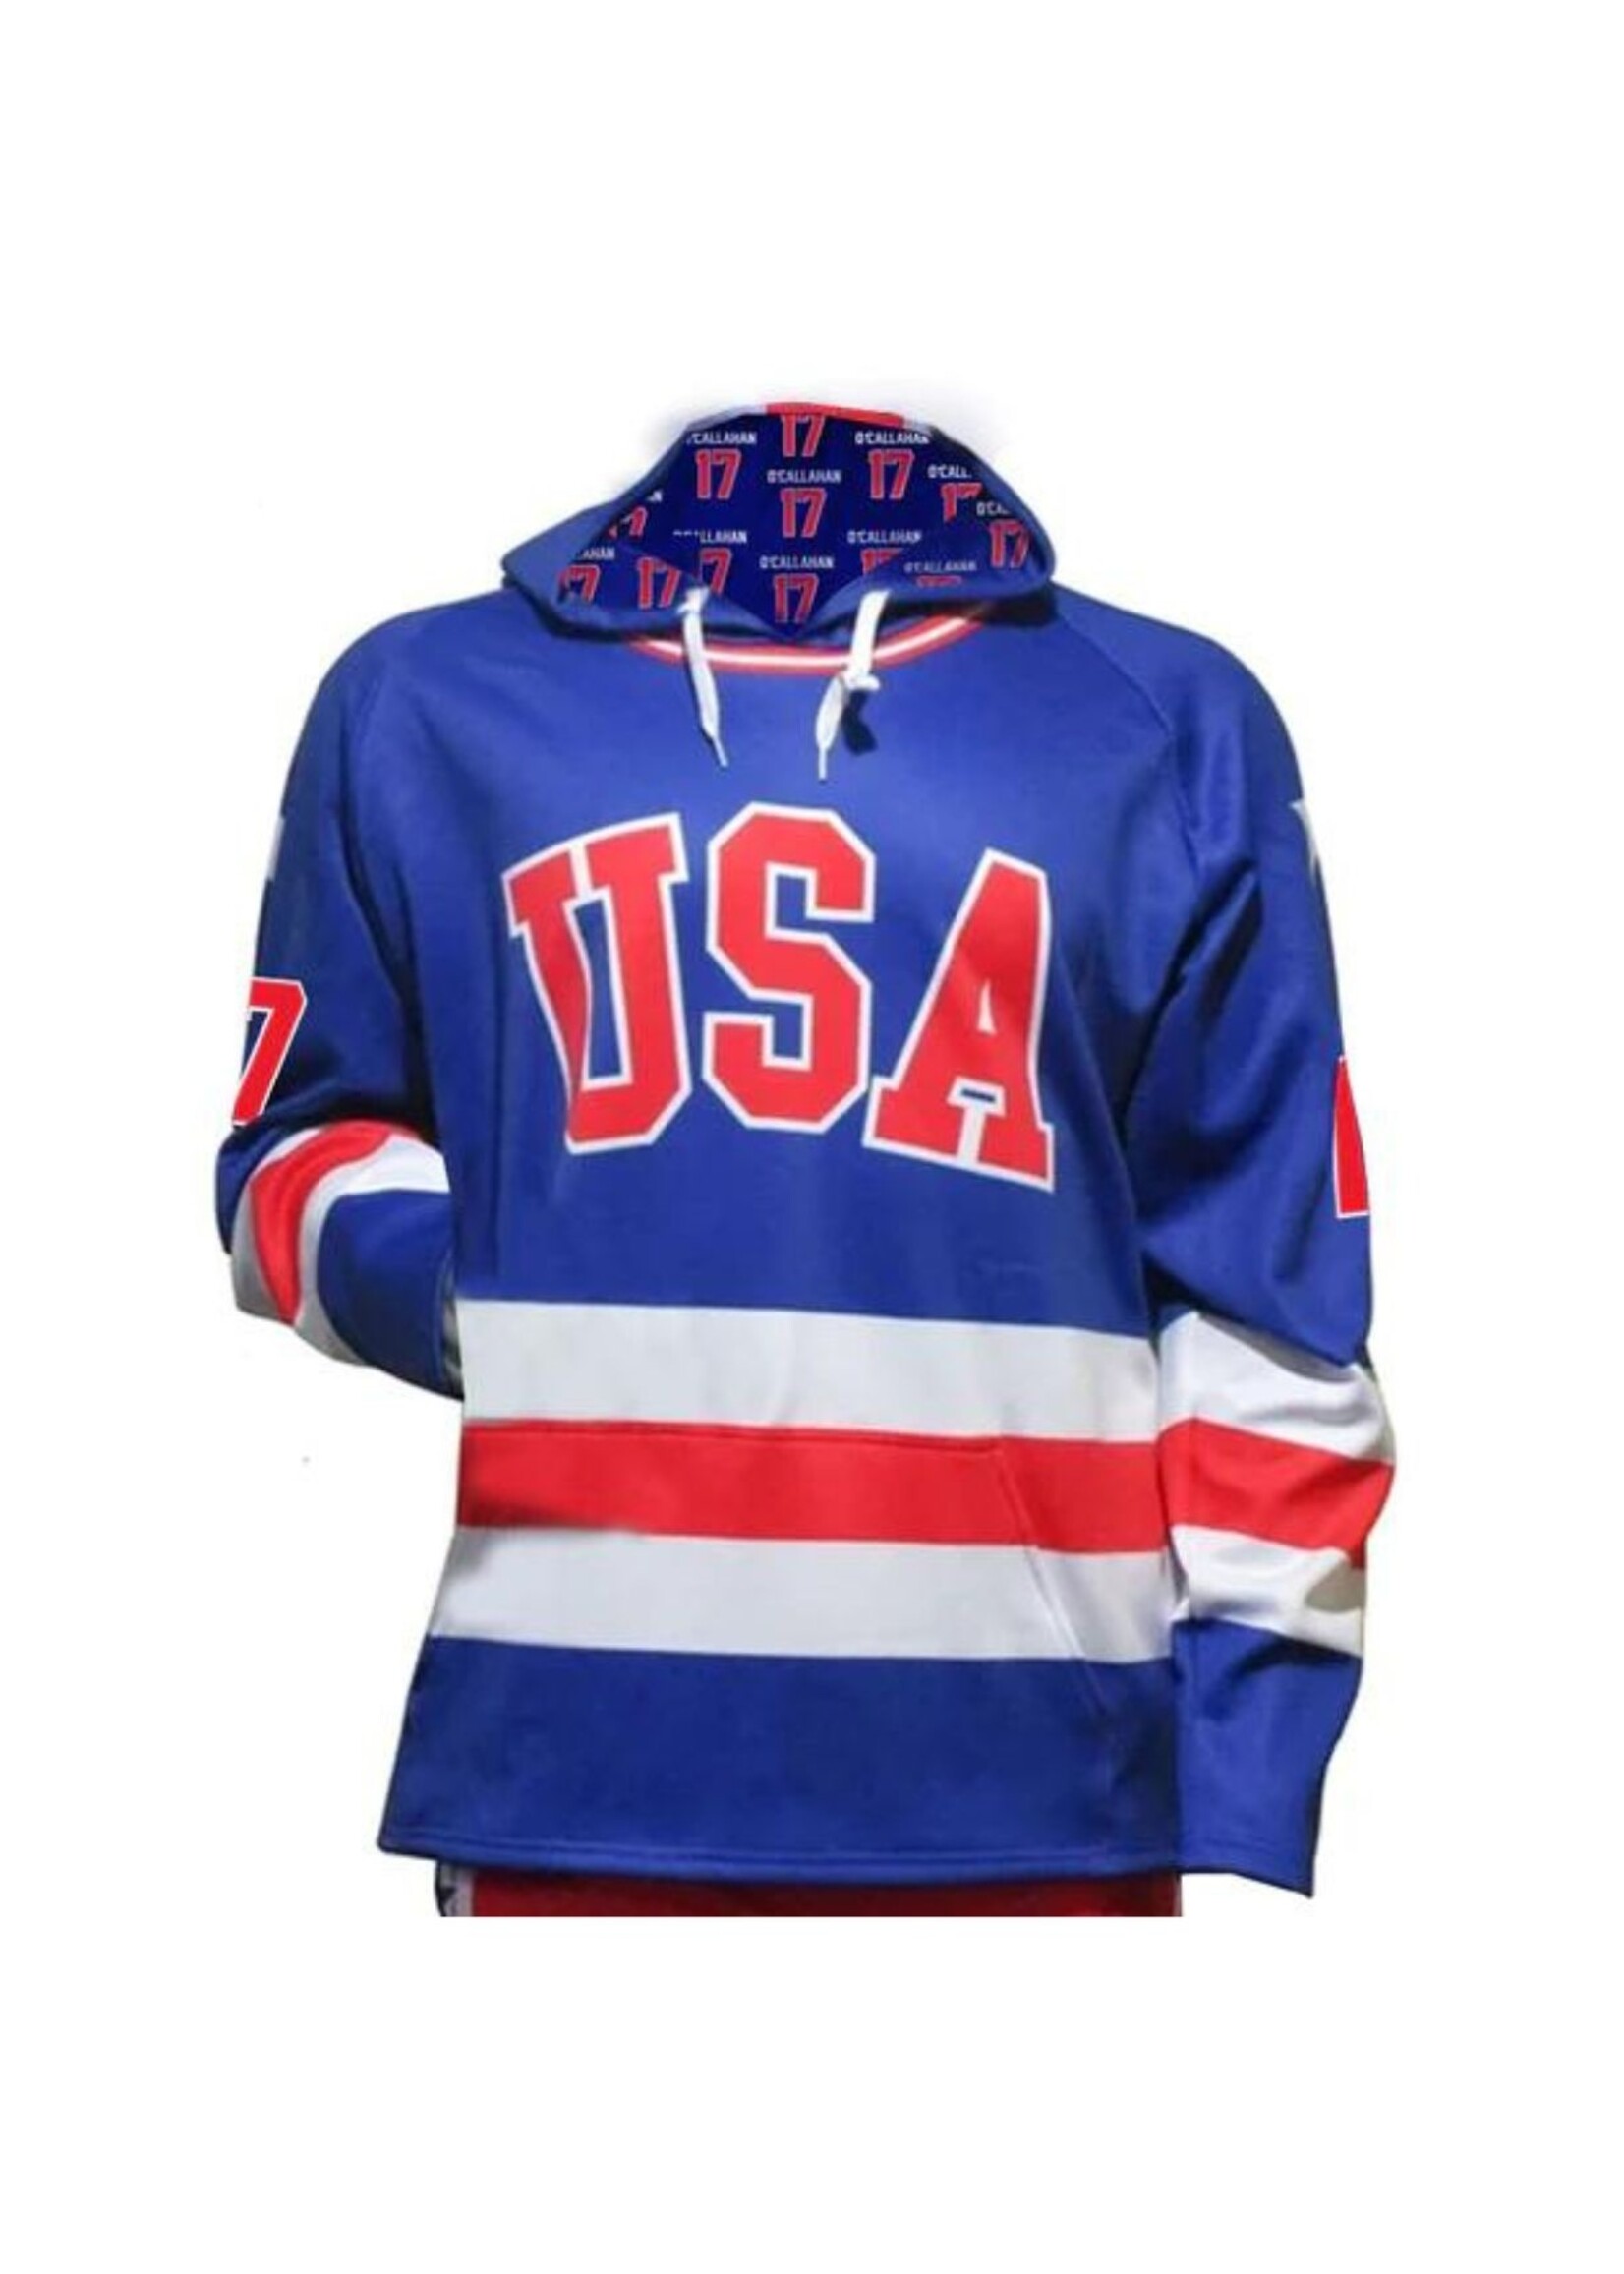 K1 1980 Miracle on Ice Player Name & Number Home Jersey